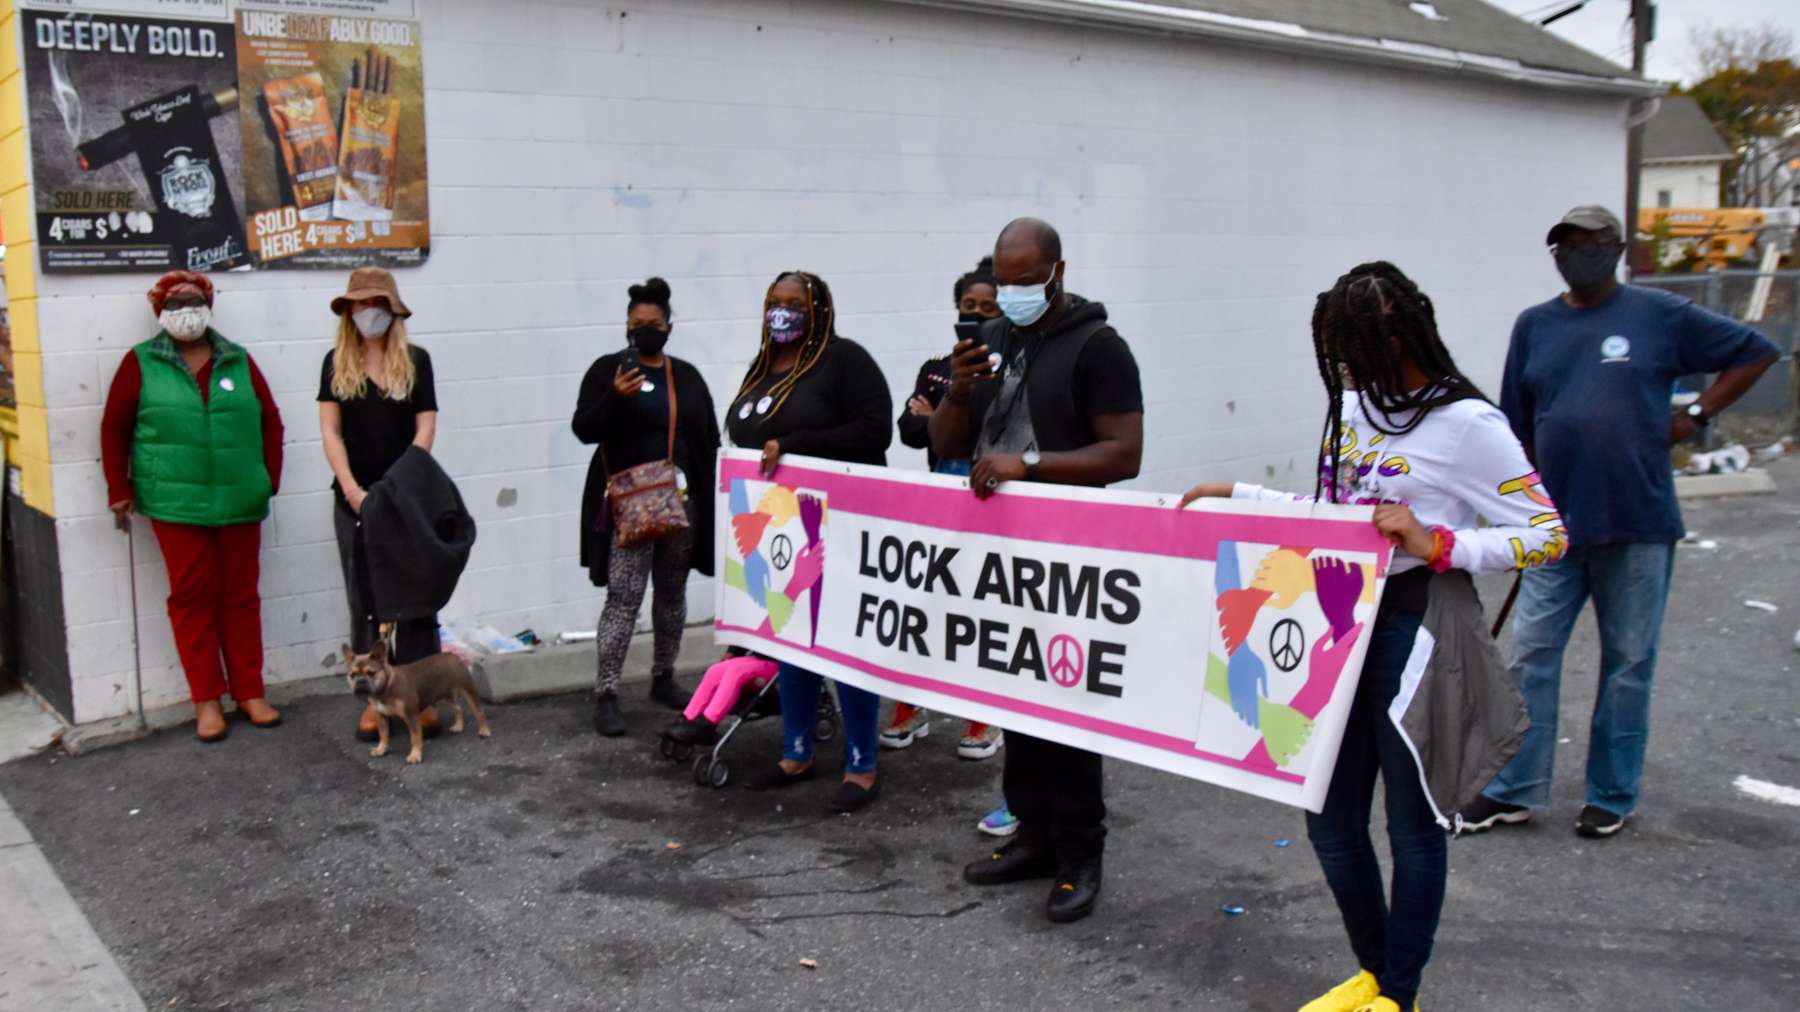 Rhode Island News: Lock Arms for Peace on Smith Hill: We’re burying our children